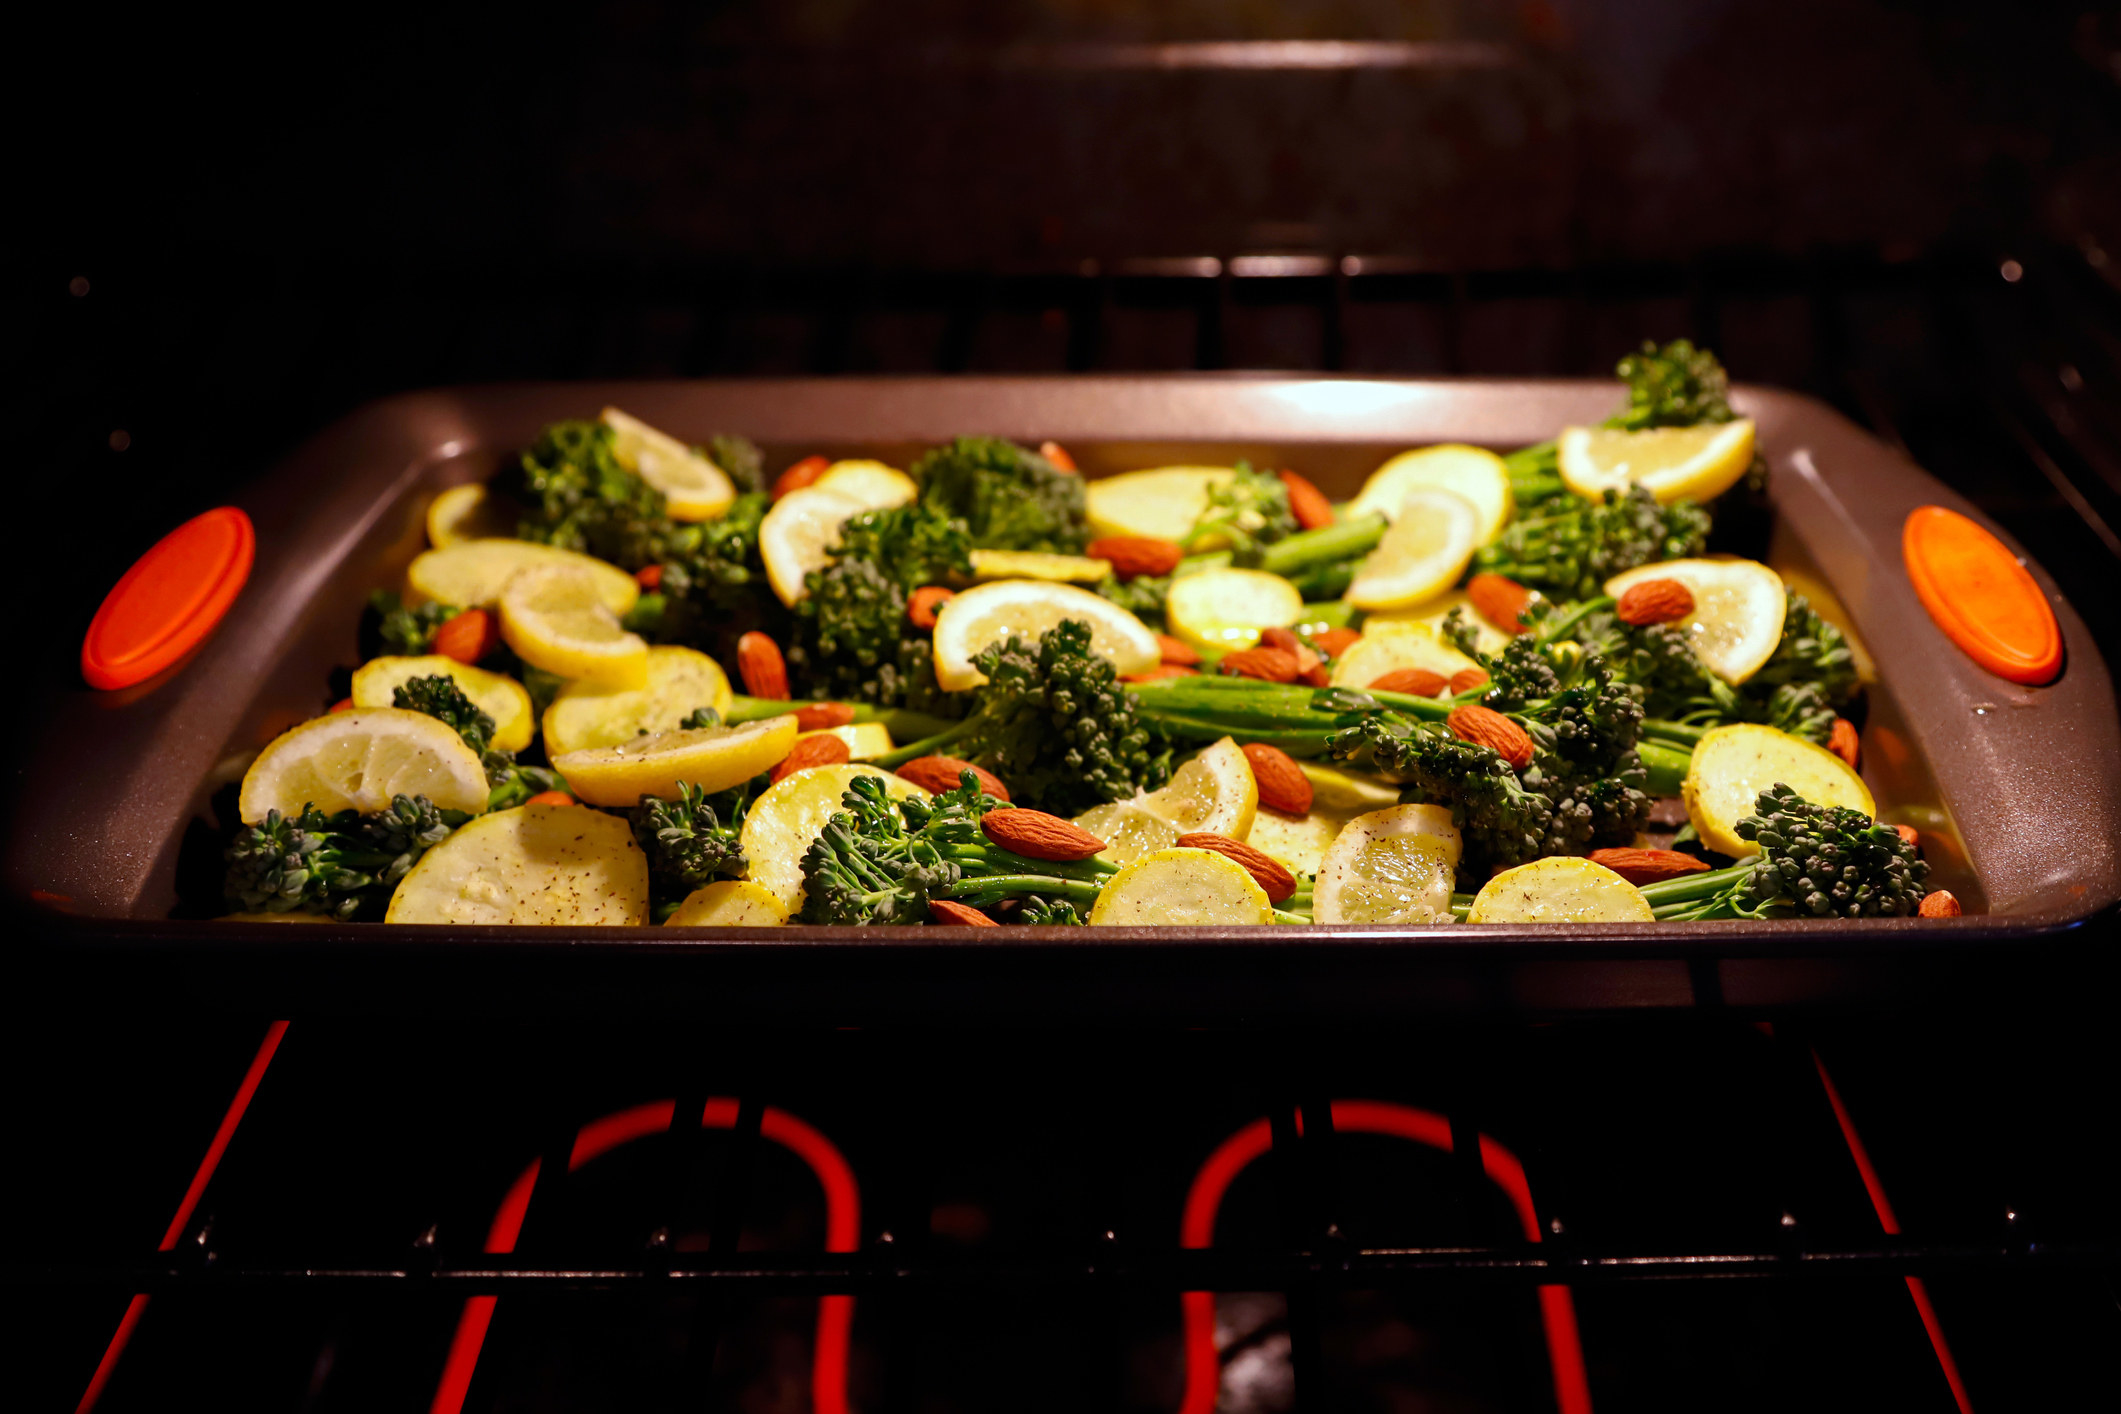 Roasted vegetables in the oven.